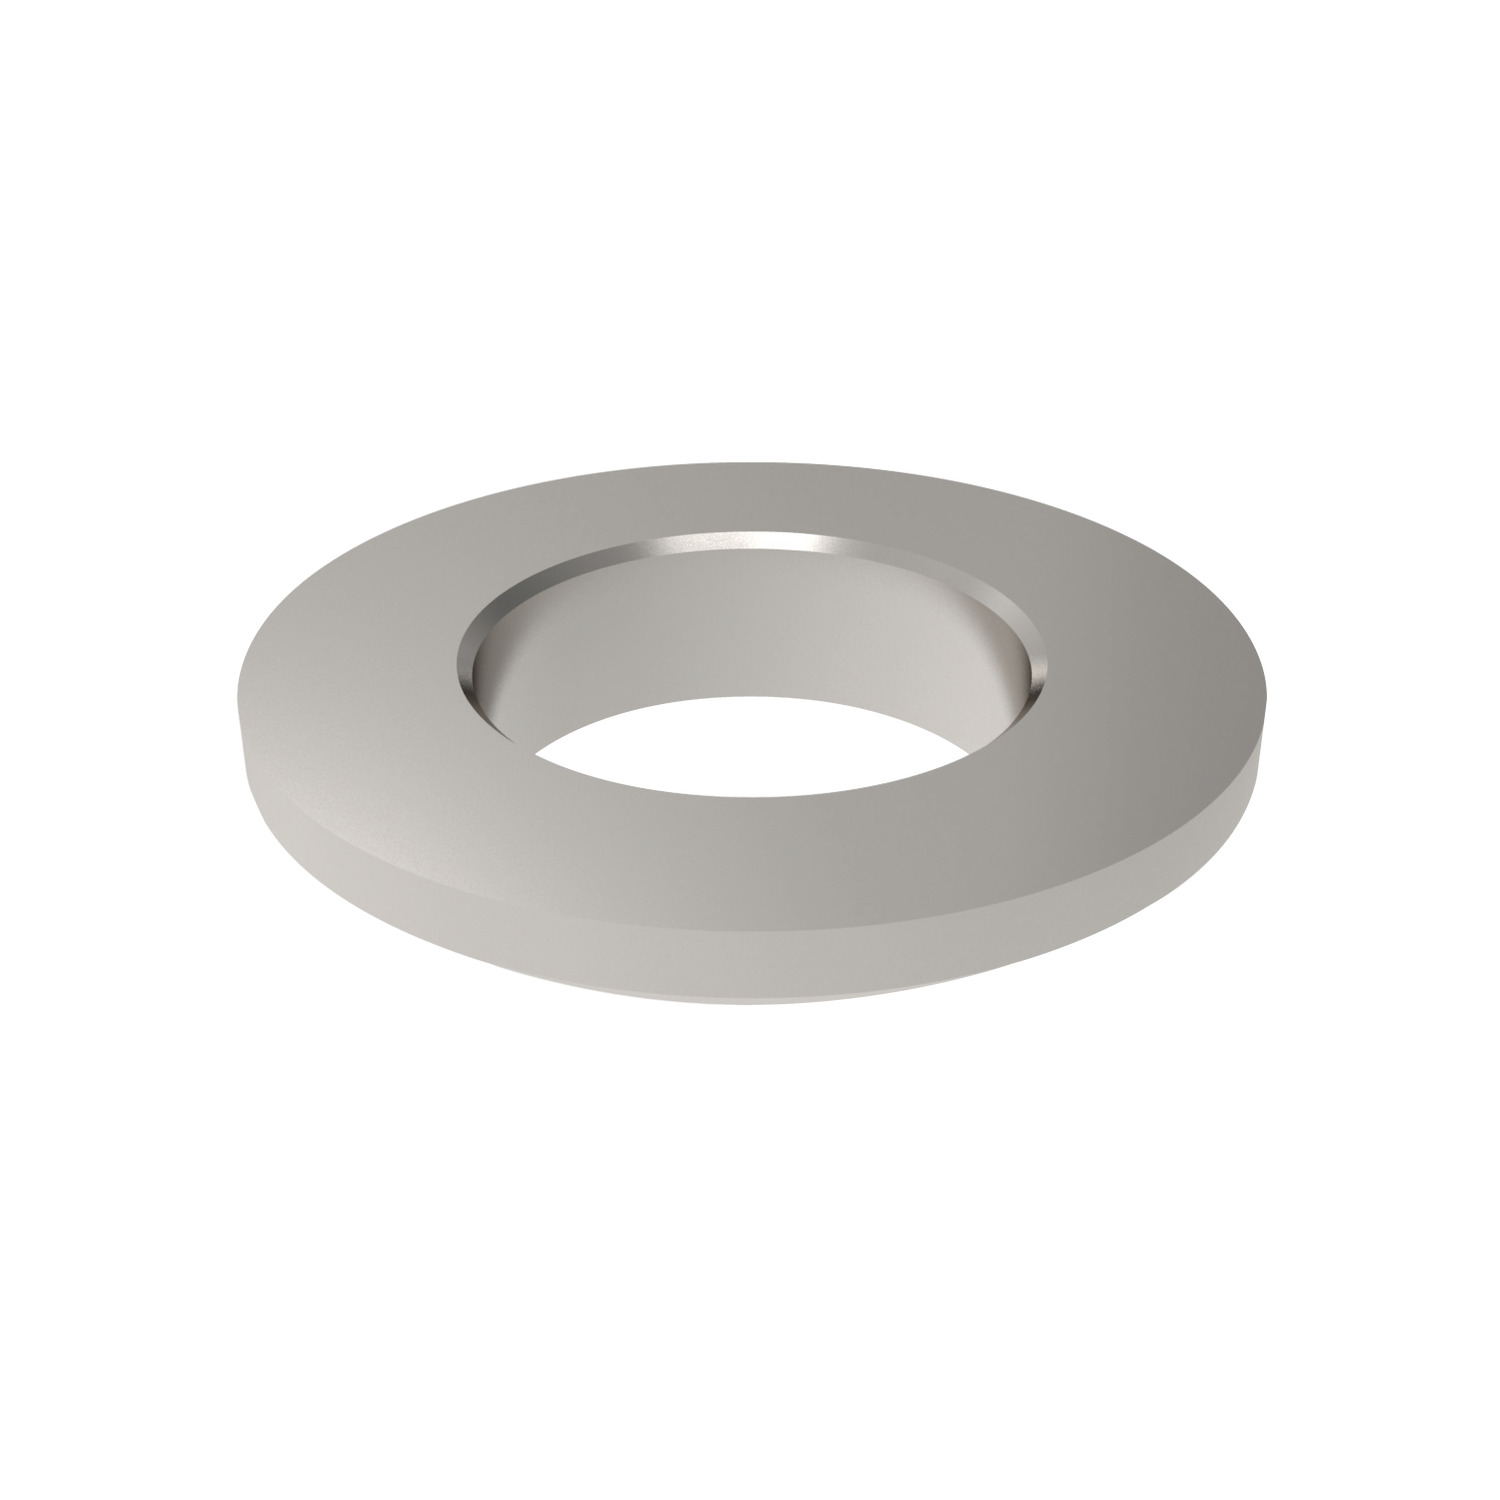 Washers - Stainless Steel Stainless versions of our spherical seat and dished washers made to DIN 6319 standards. This includes: Spherical Seat and Dished Washer designs.